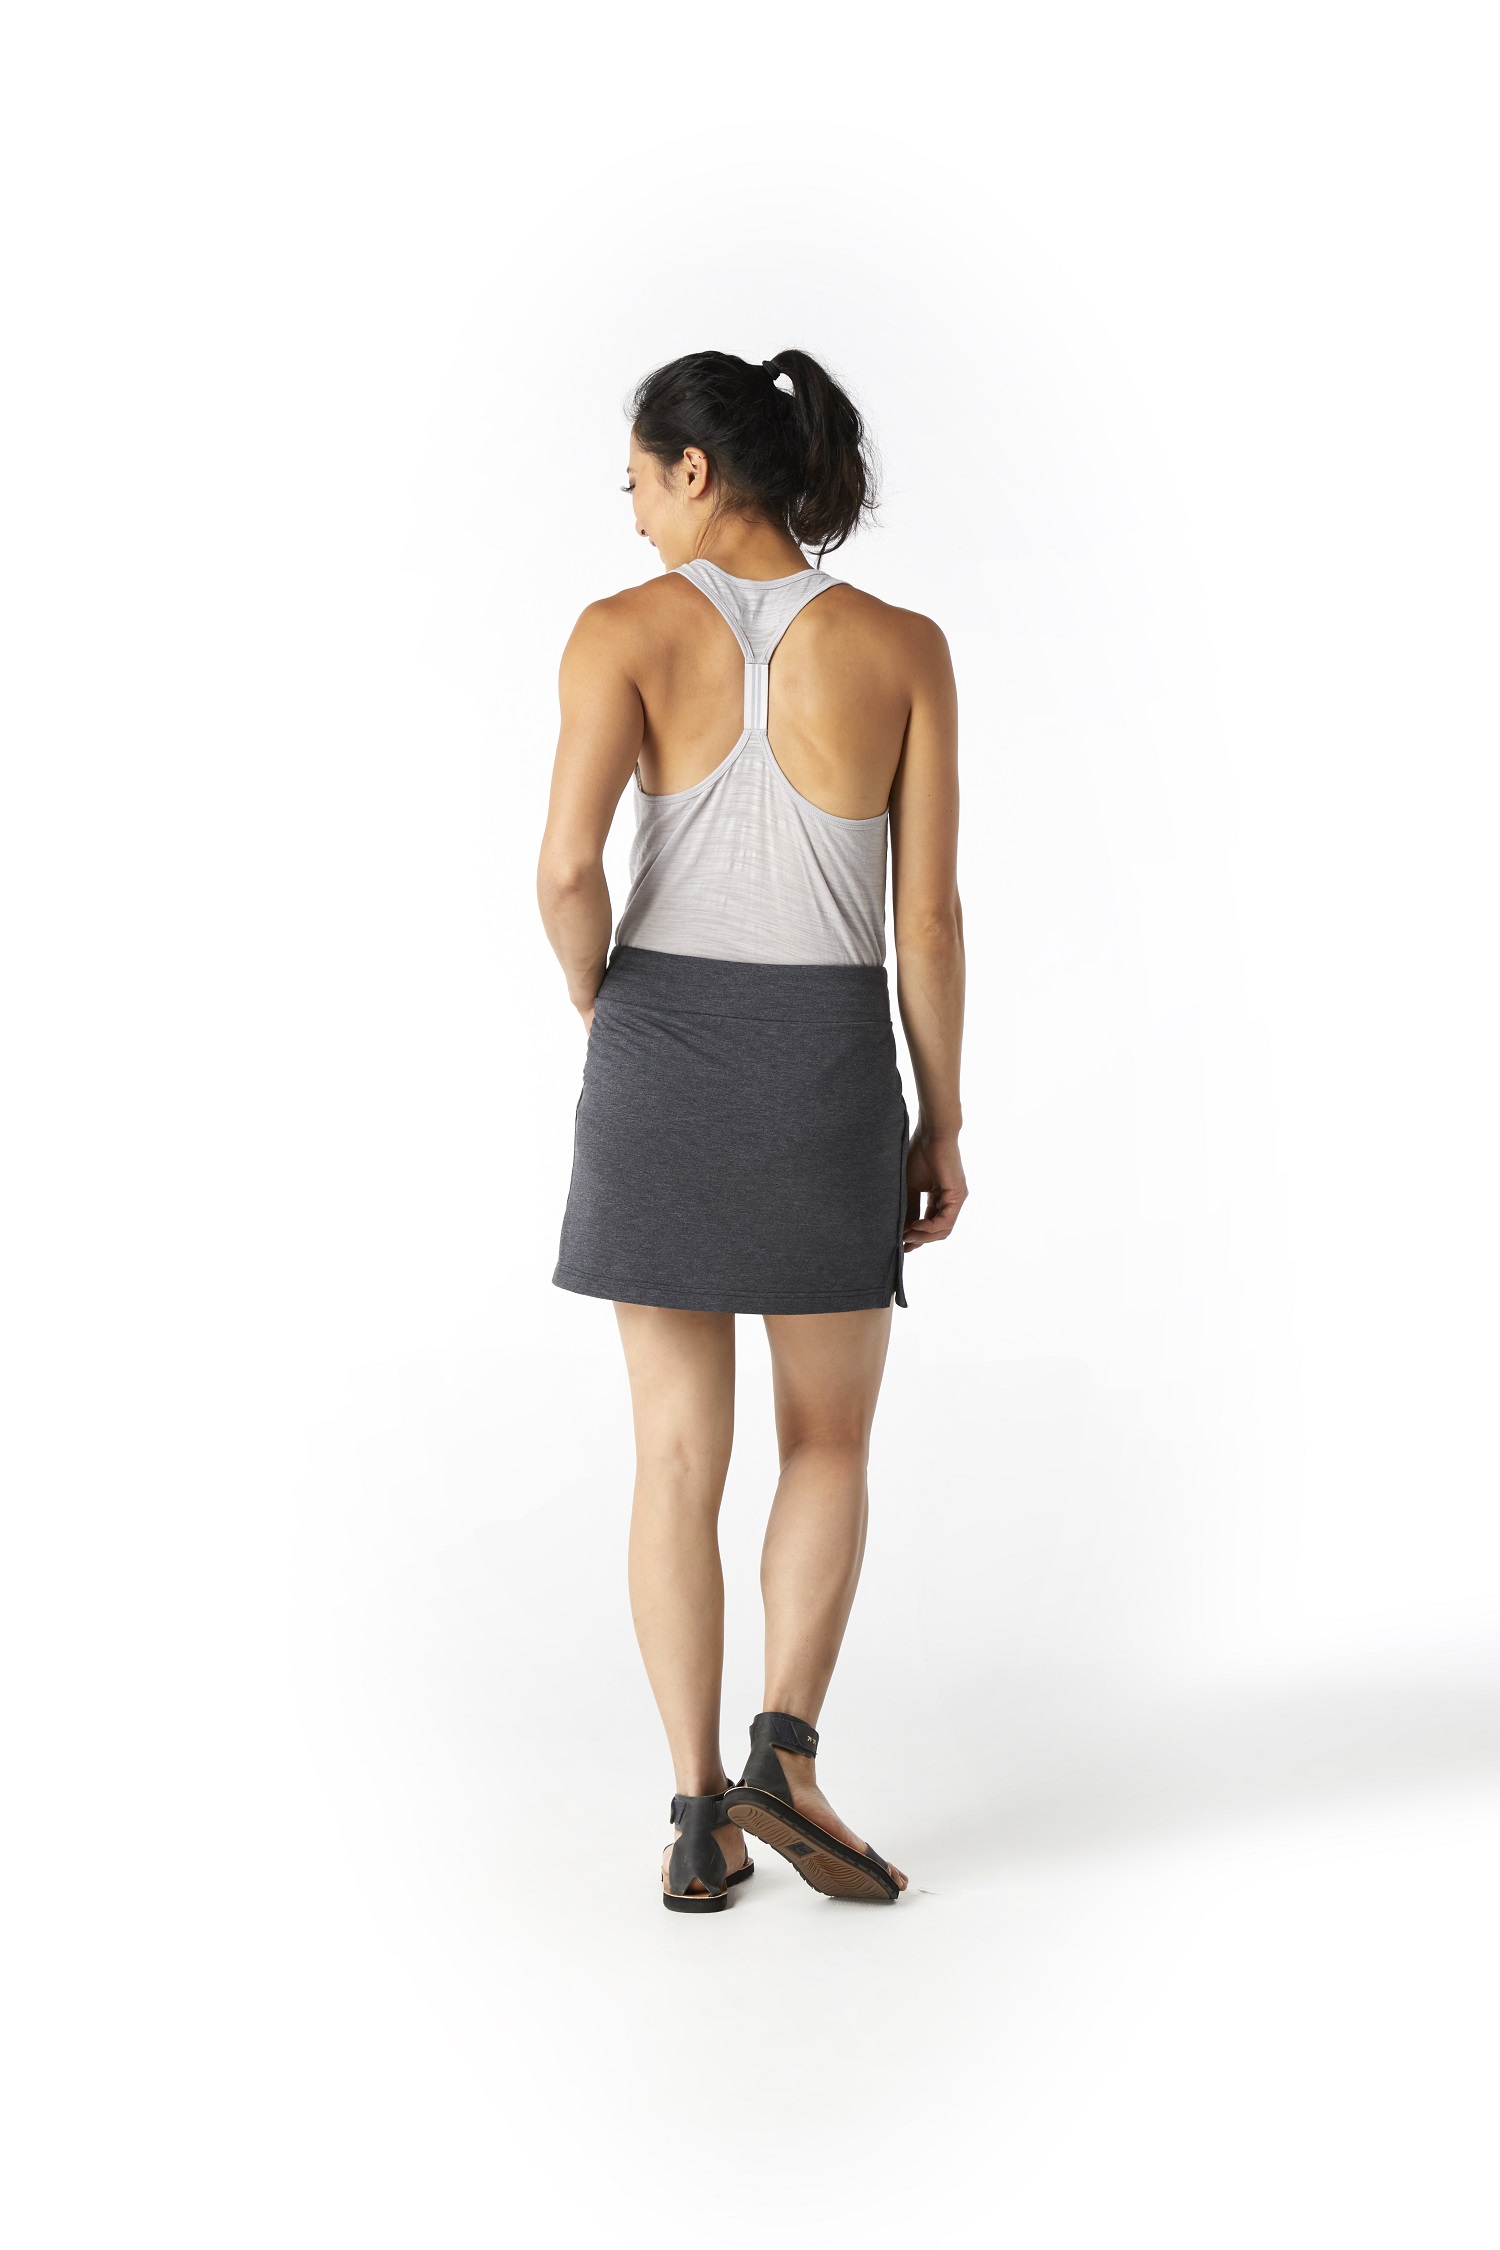 Smartwool Womens Active Reset Skirt SW016149 size xs, M, L, XL4